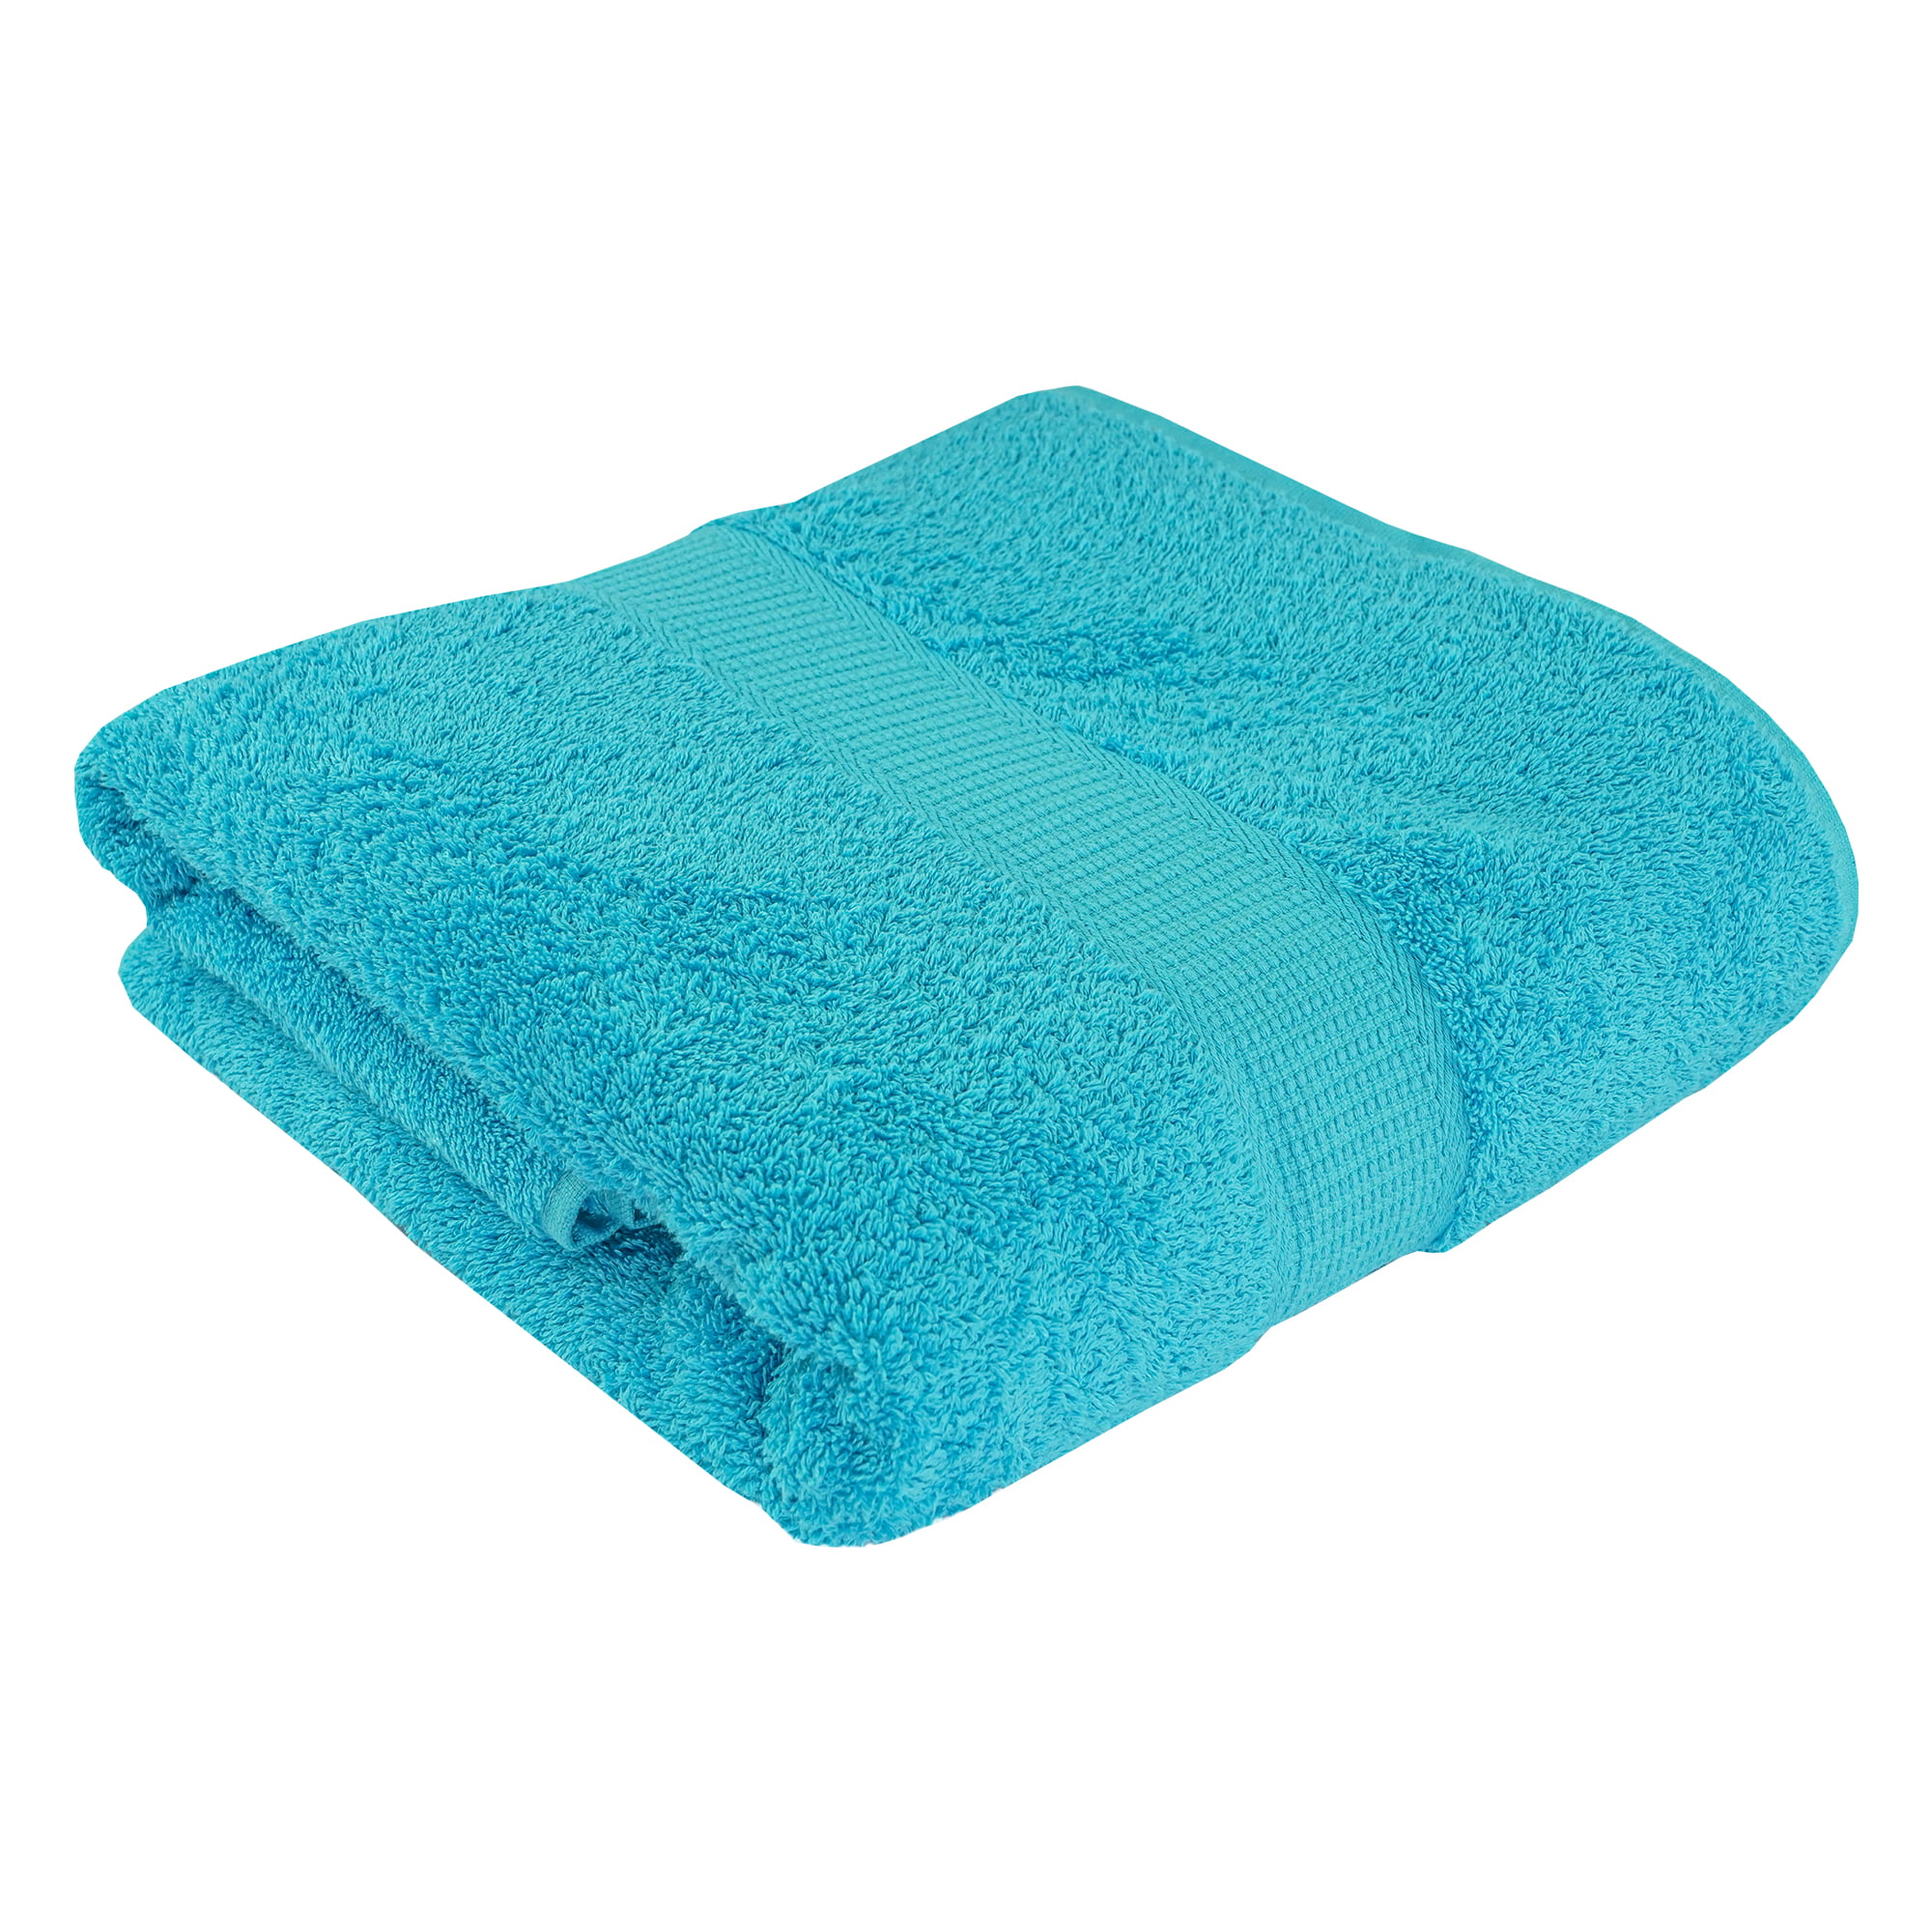 High Quality Large Bath Towels Gifts For Adults 80*160 Cm 850g 100